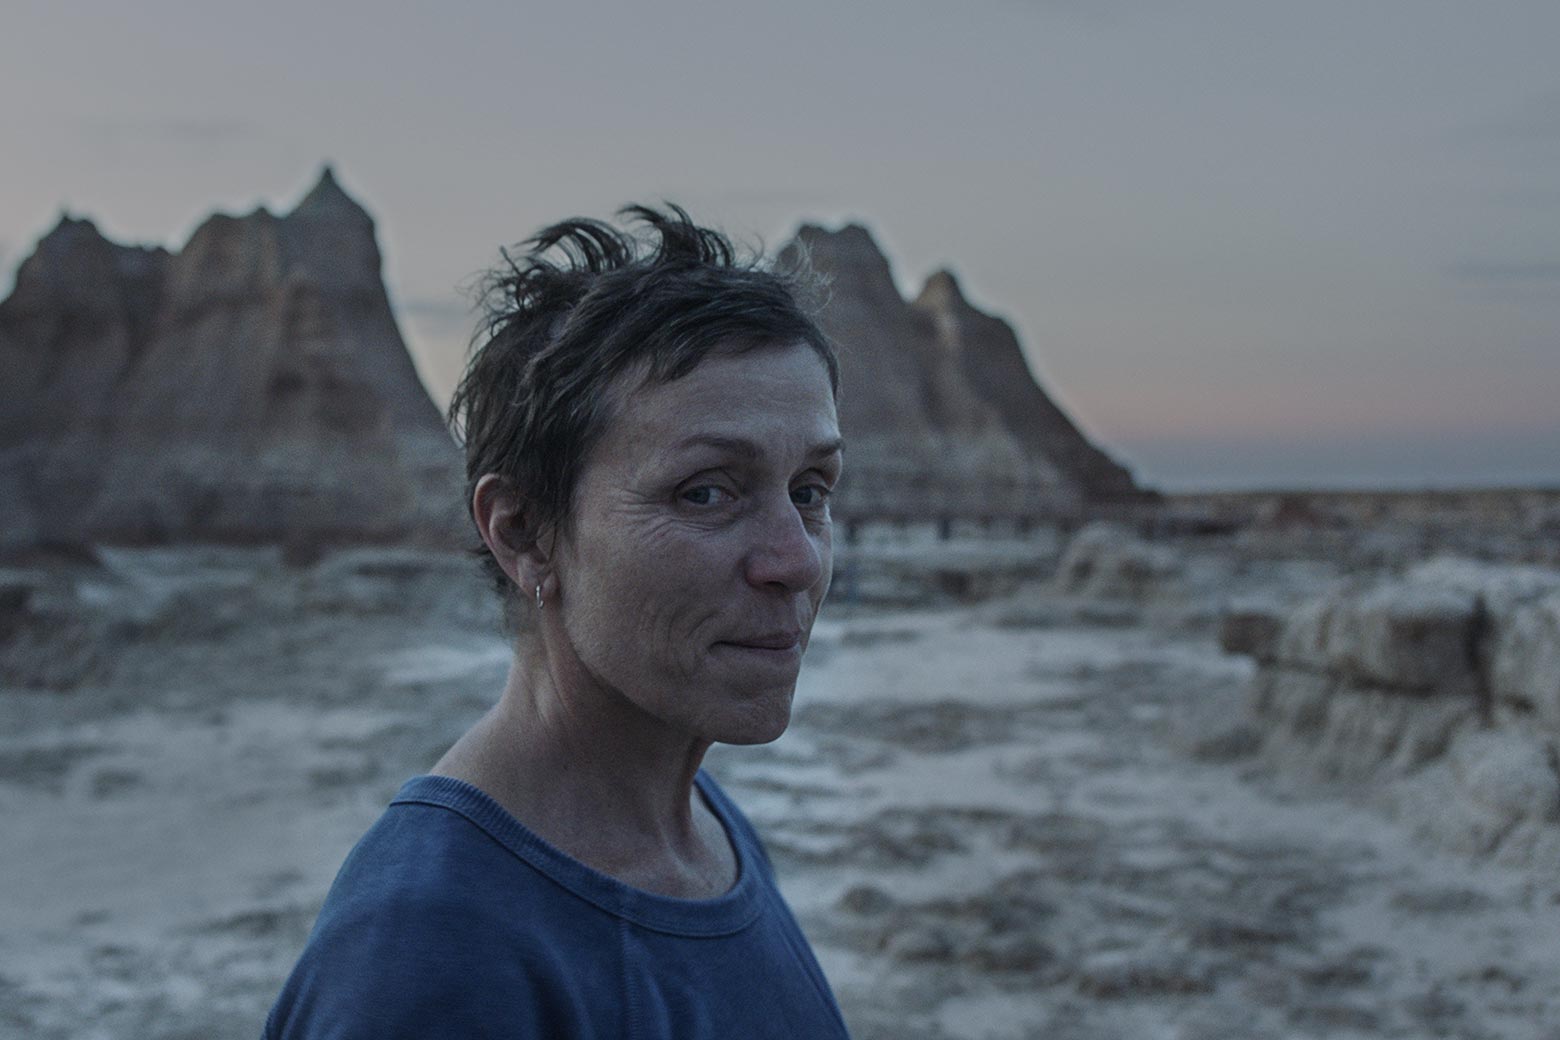 McDormand as Fern, smiling slightly as she stands in a desert landscape at sunset.